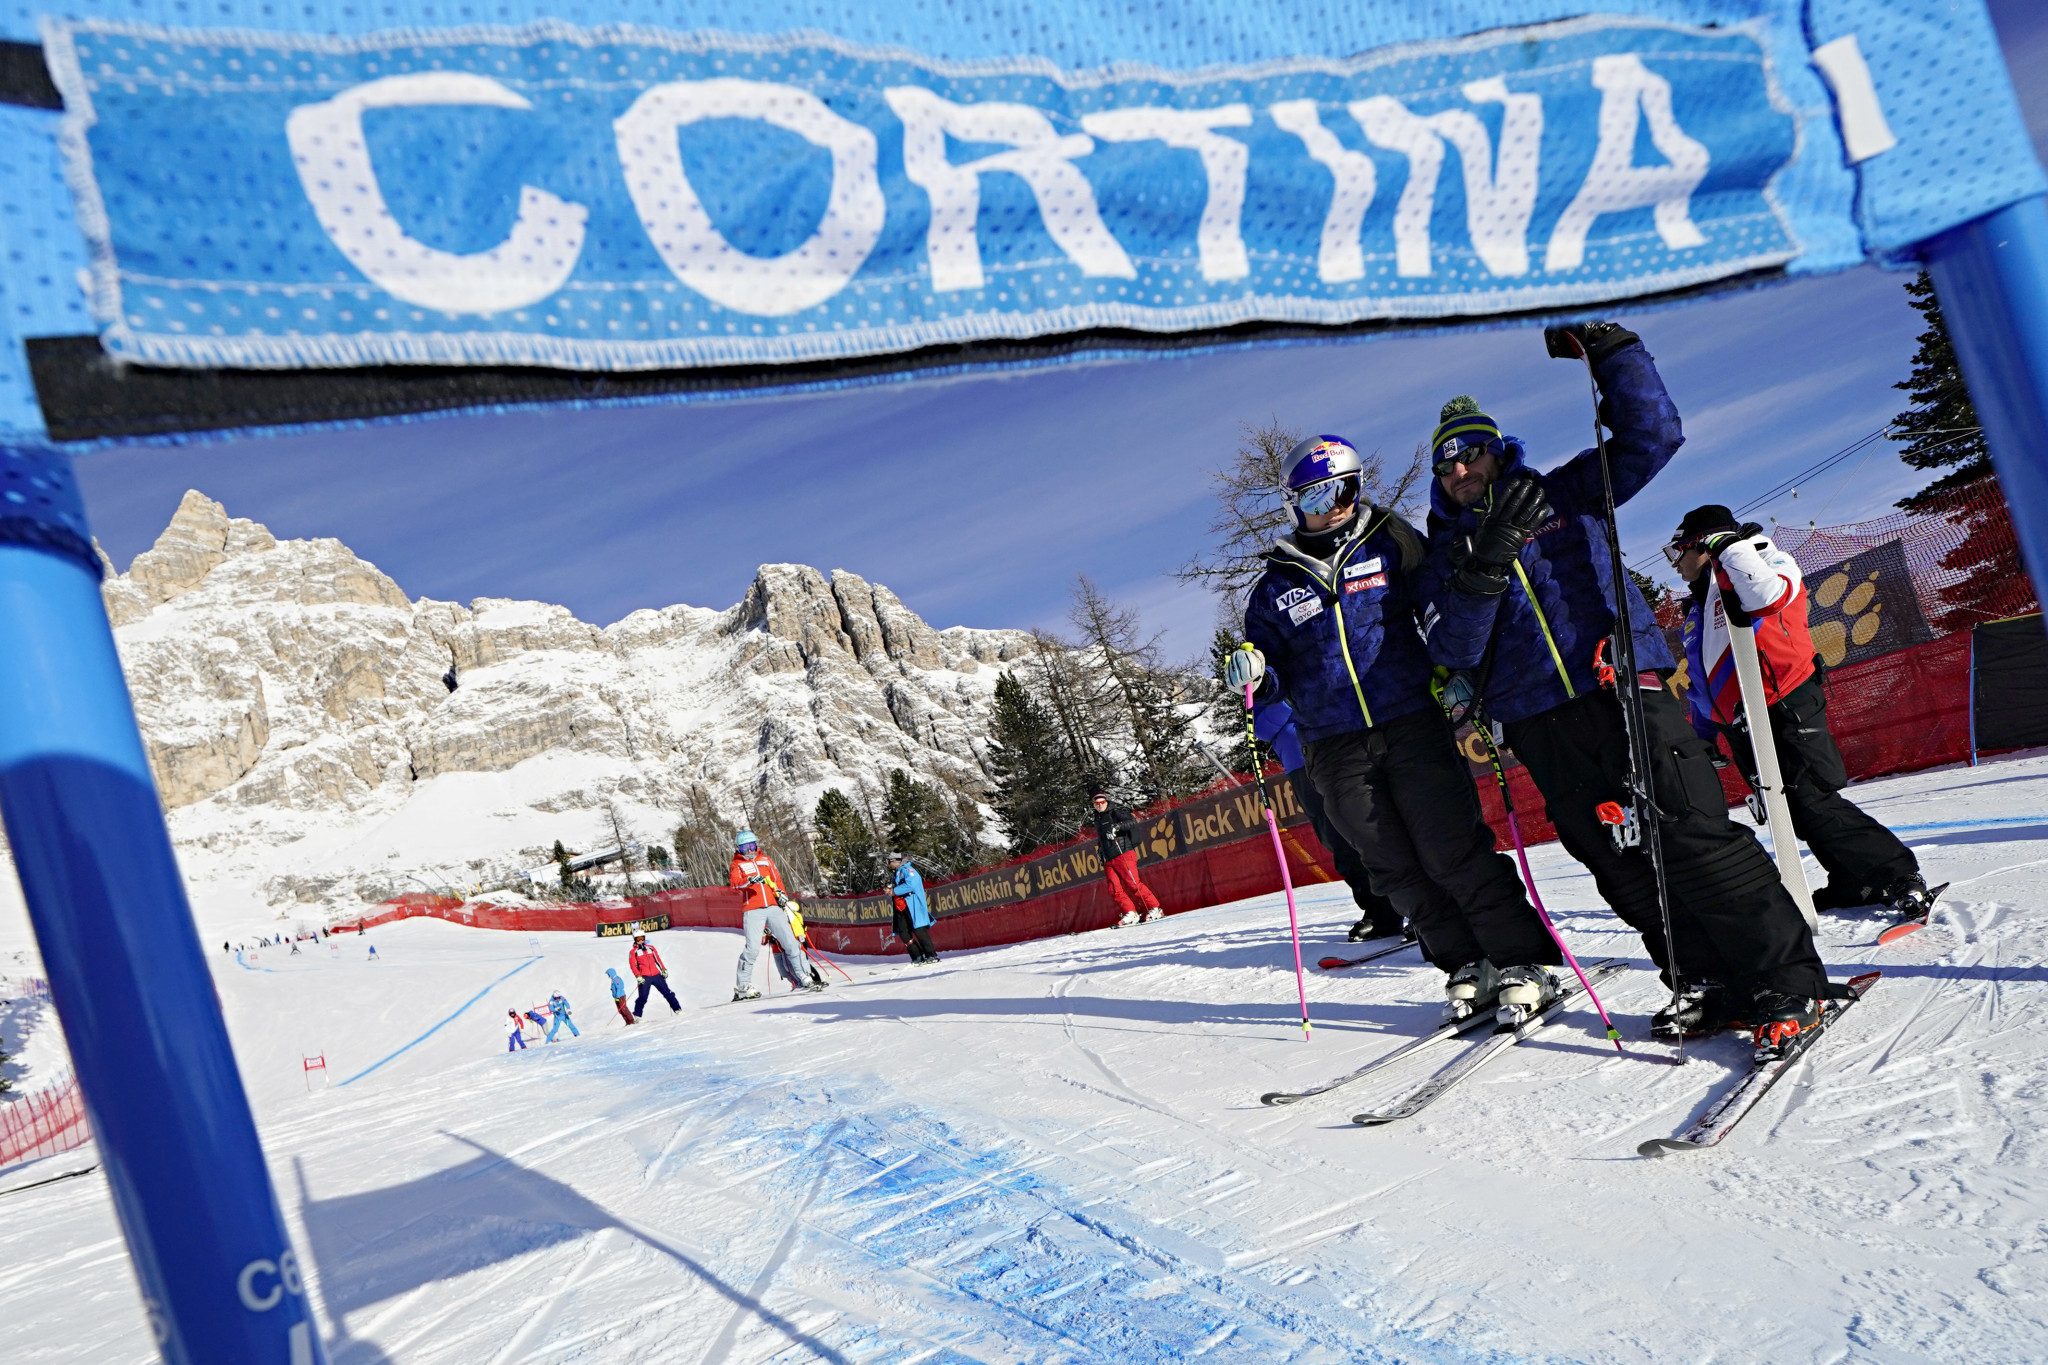 Cortina d’Ampezzo set for world's longest skiable route once new lifts are built